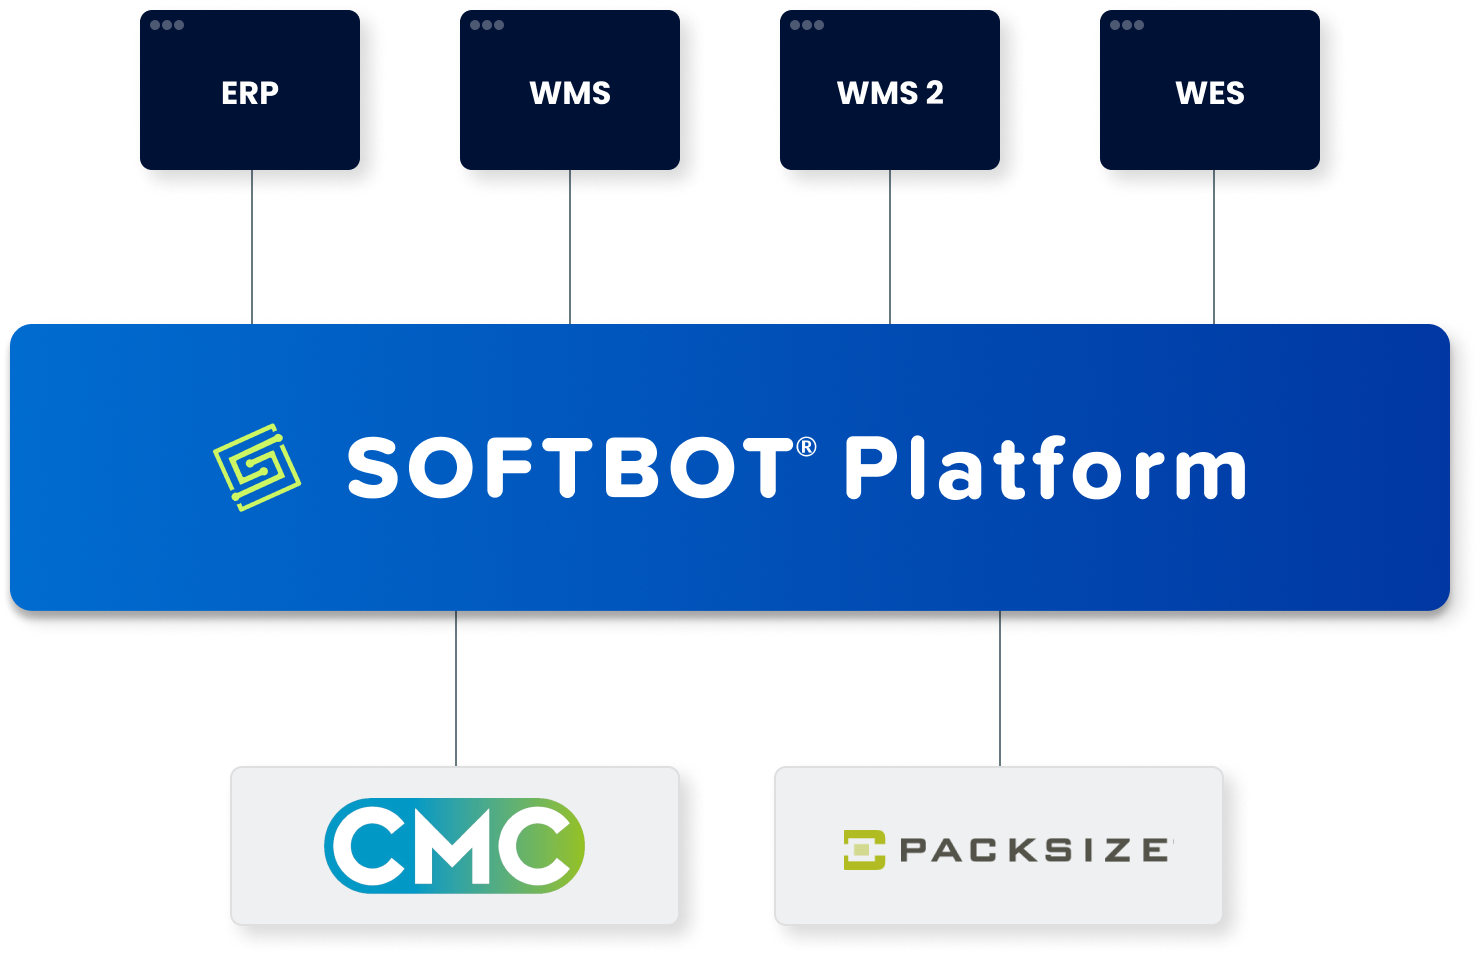 Connect Packsize and CMC Packaging Automation to any host system with the SOFTBOT Platform